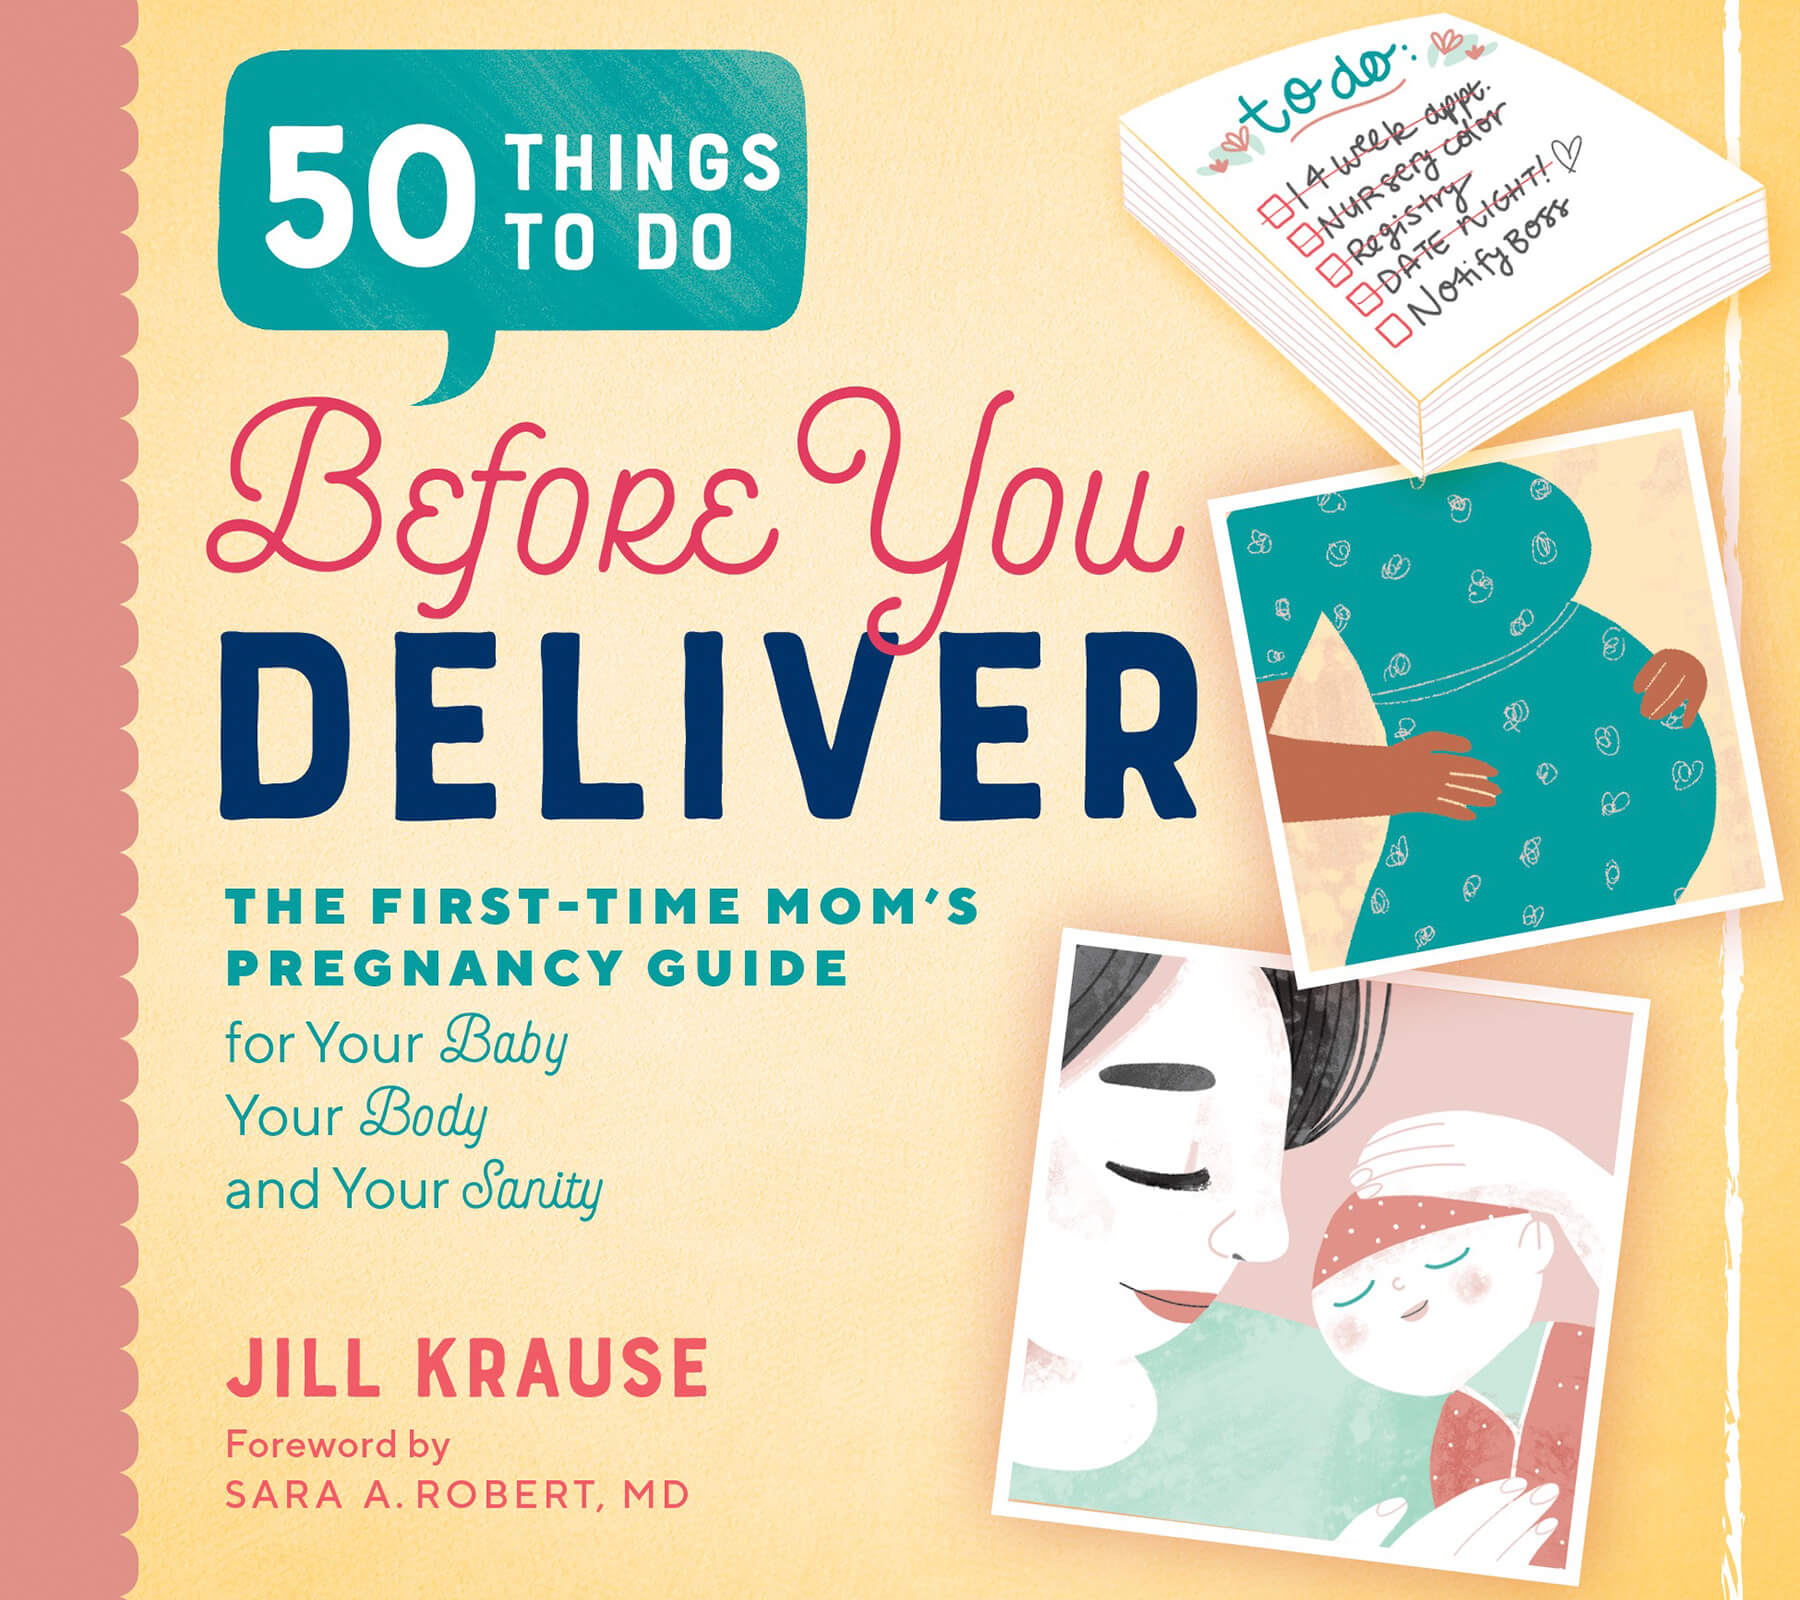 Pregnancy Book for the Modern-Day Mom: Interview with Author Jill Krause